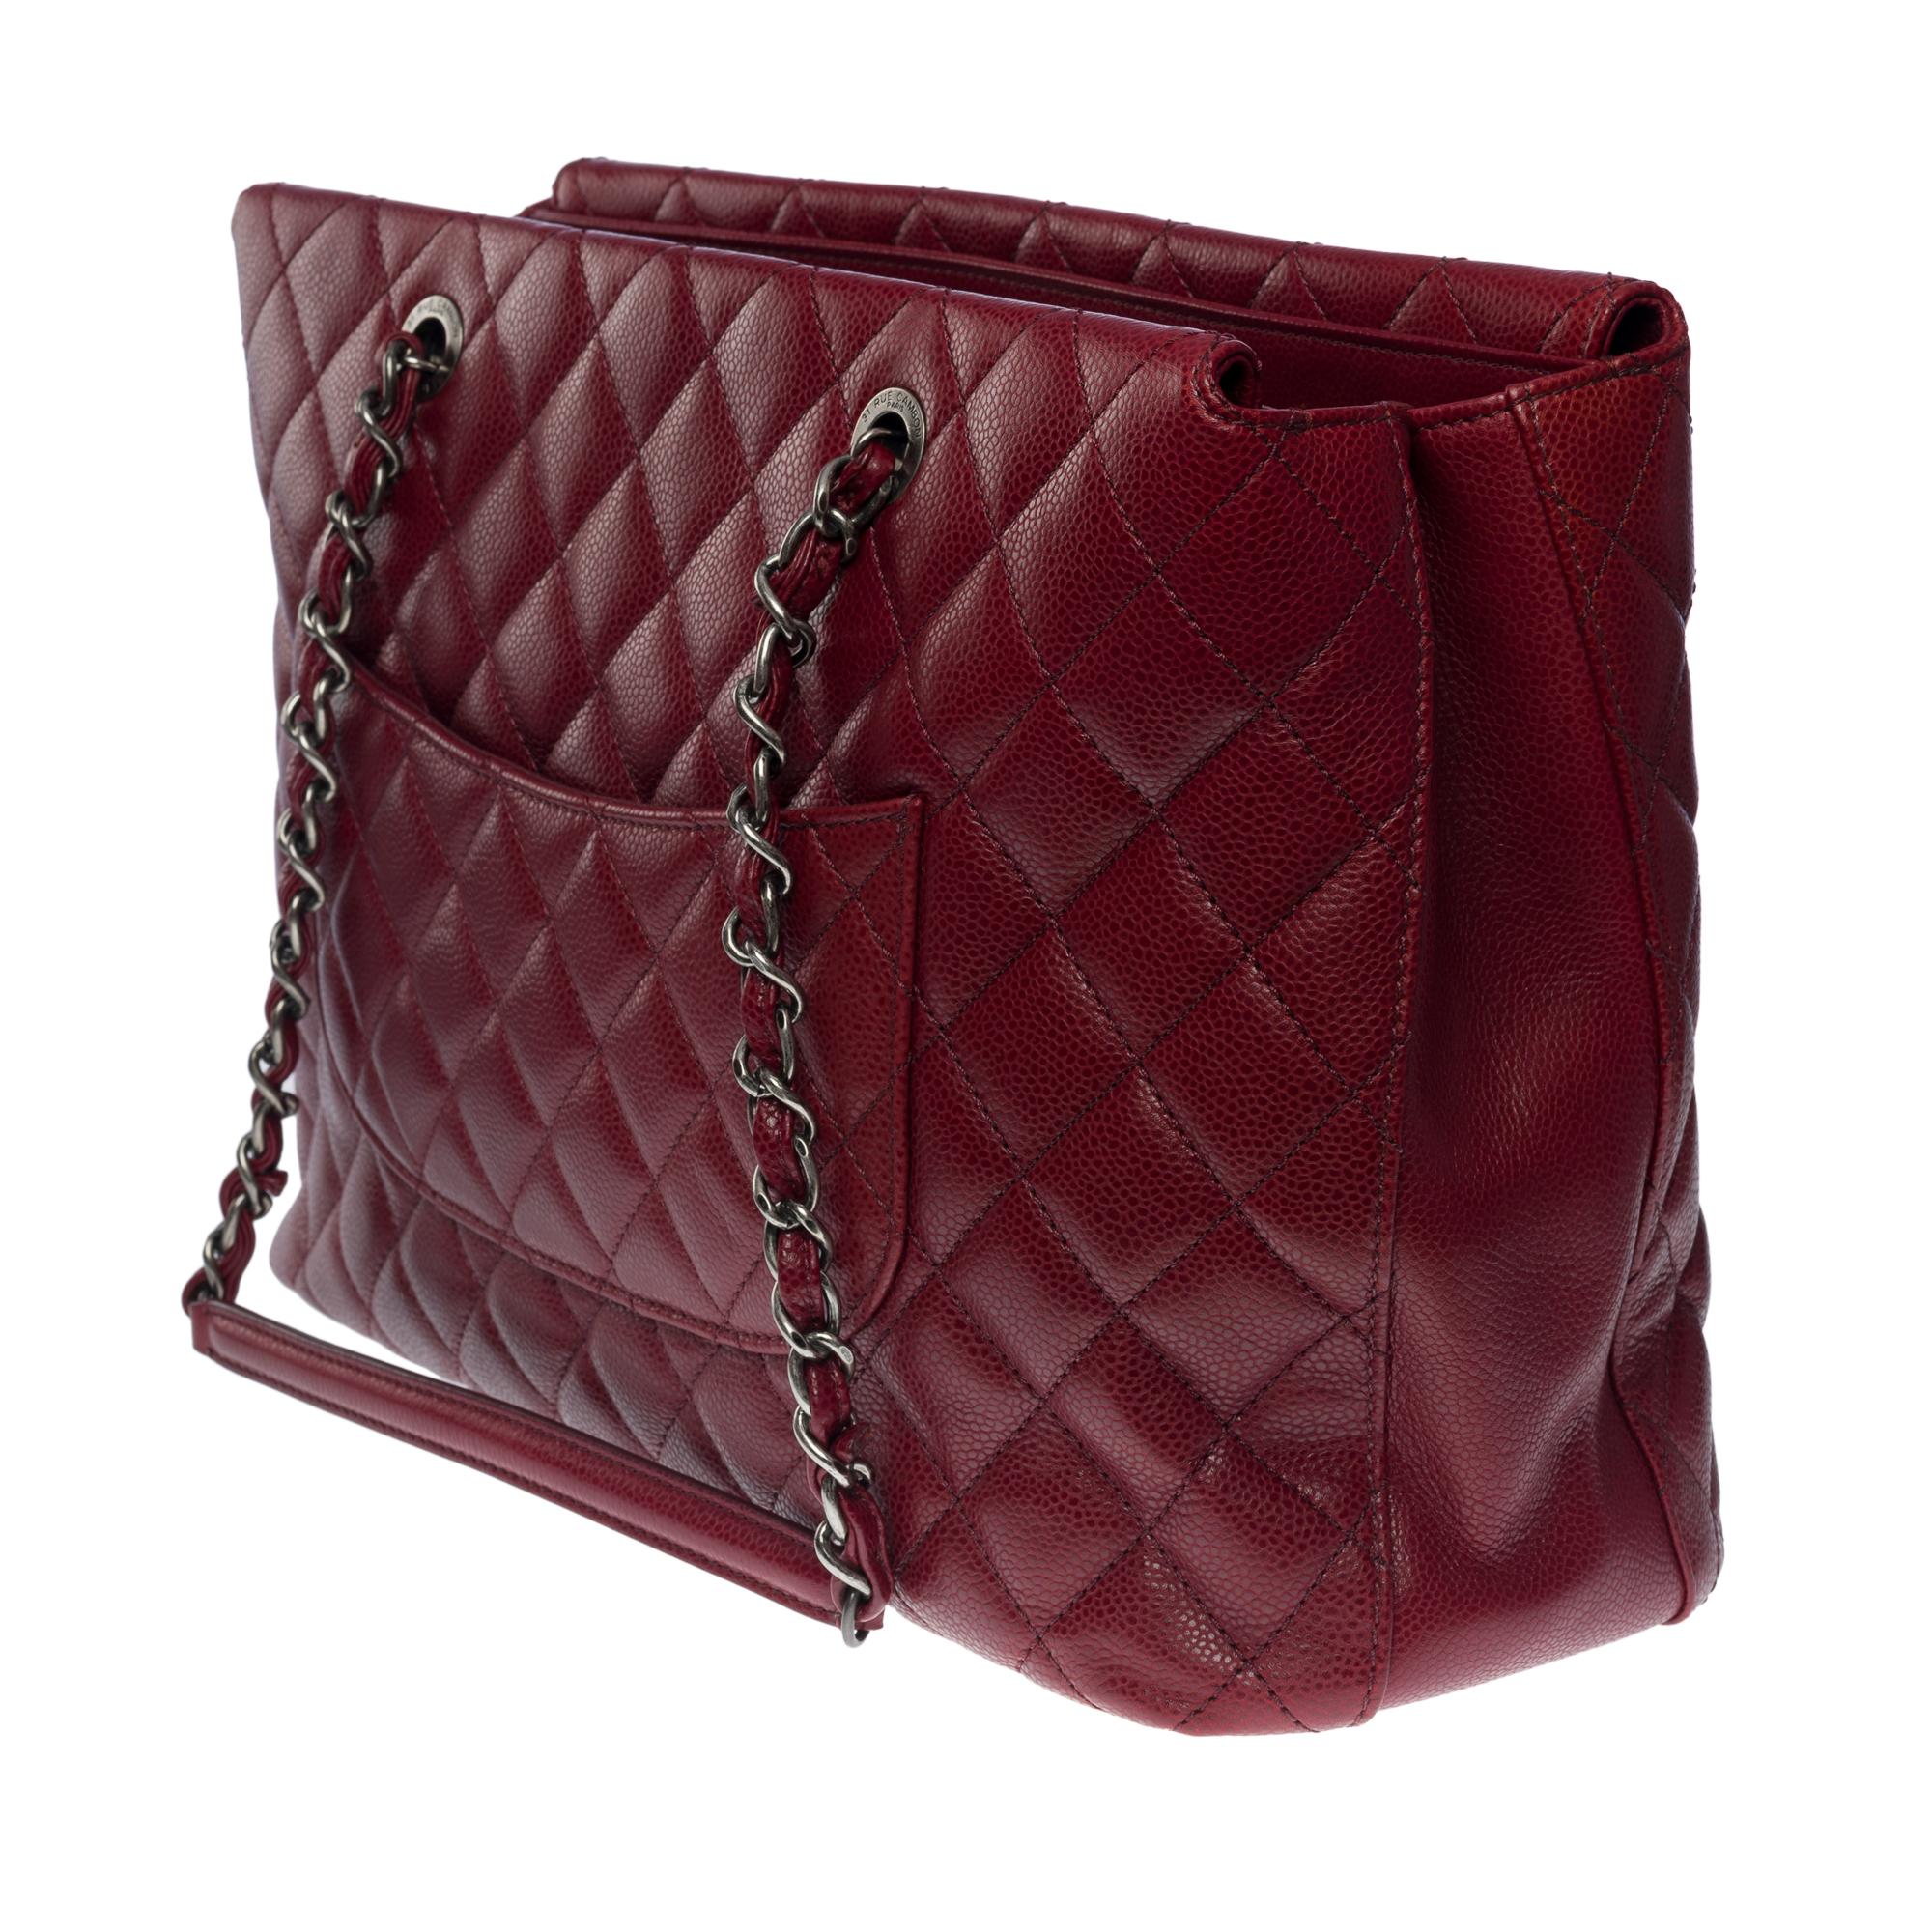 Amazing Chanel Shopping Tote bag in Burgundy Caviar quilted leather, SHW 1